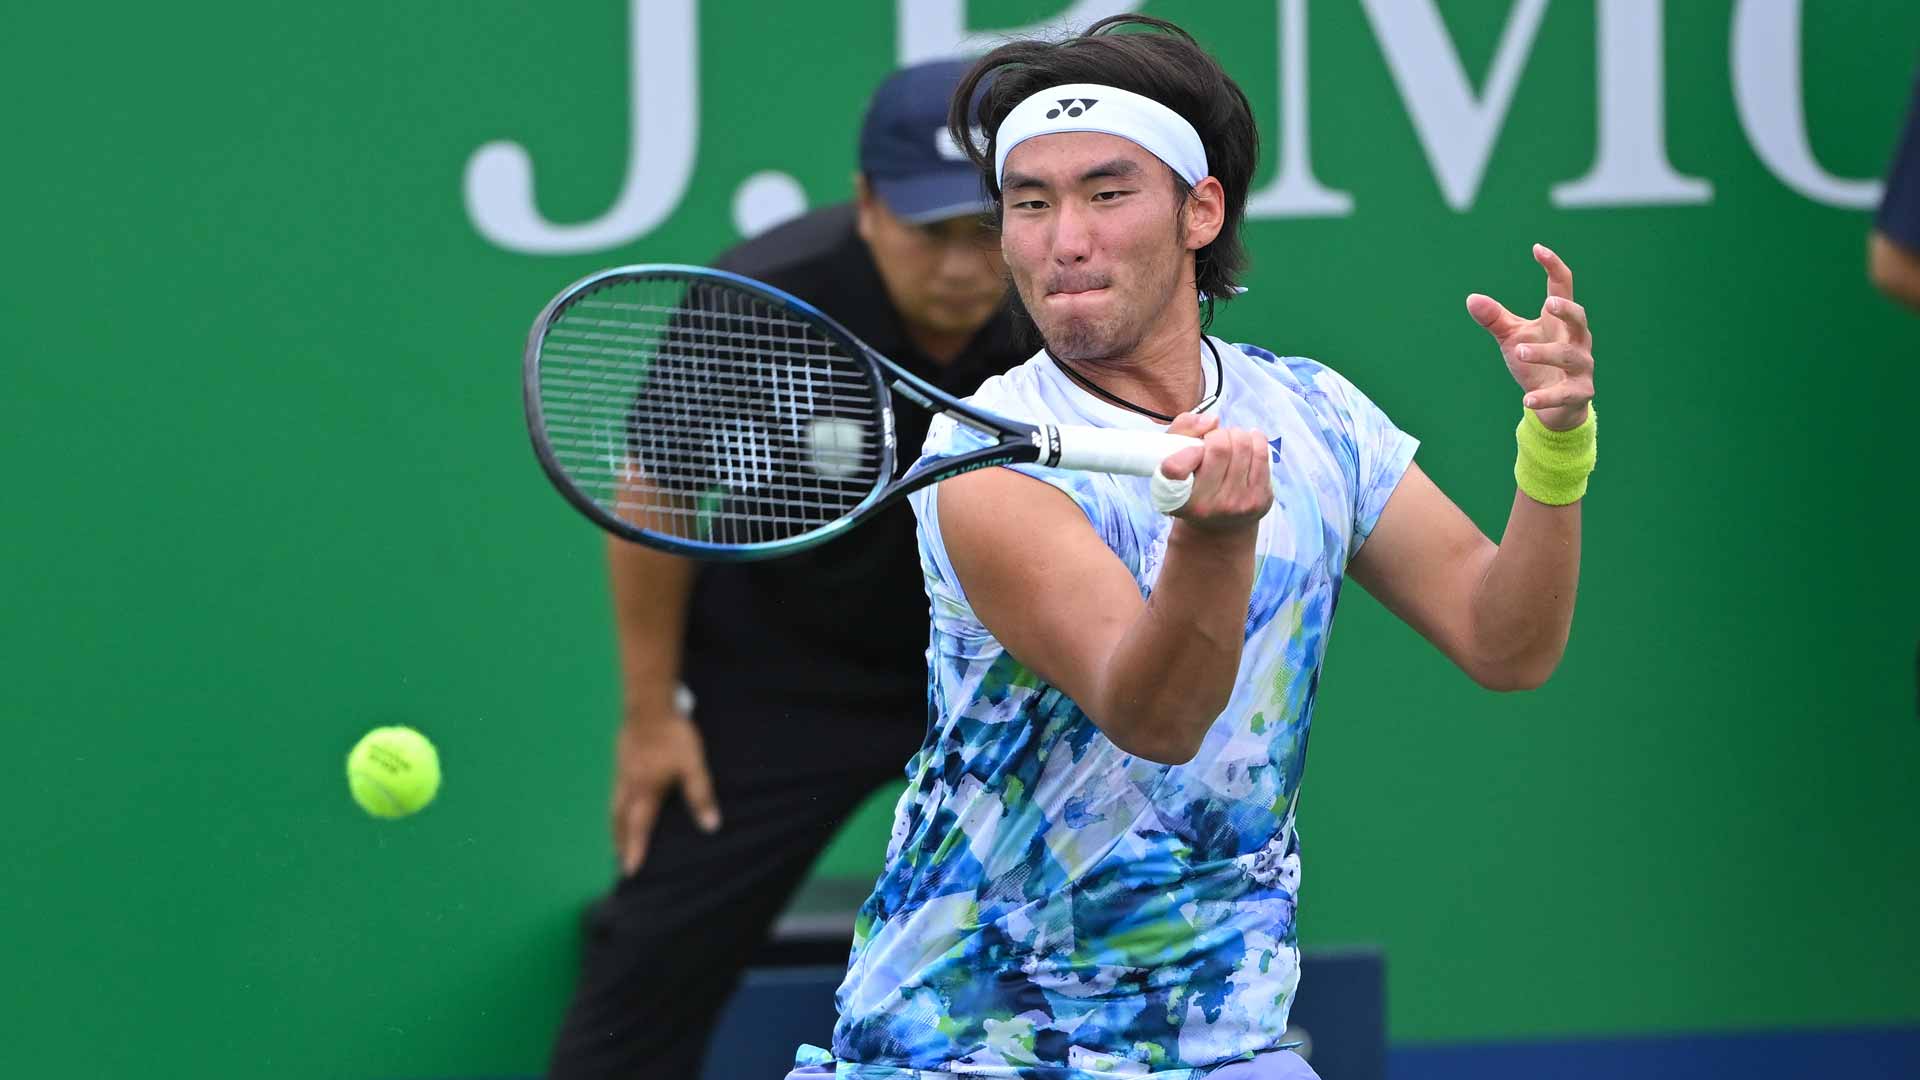 Buyunchaokete earns his maiden ATP Tour win at the <a href='https://www.atptour.com/en/tournaments/shanghai/5014/overview'>Rolex Shanghai Masters</a>.